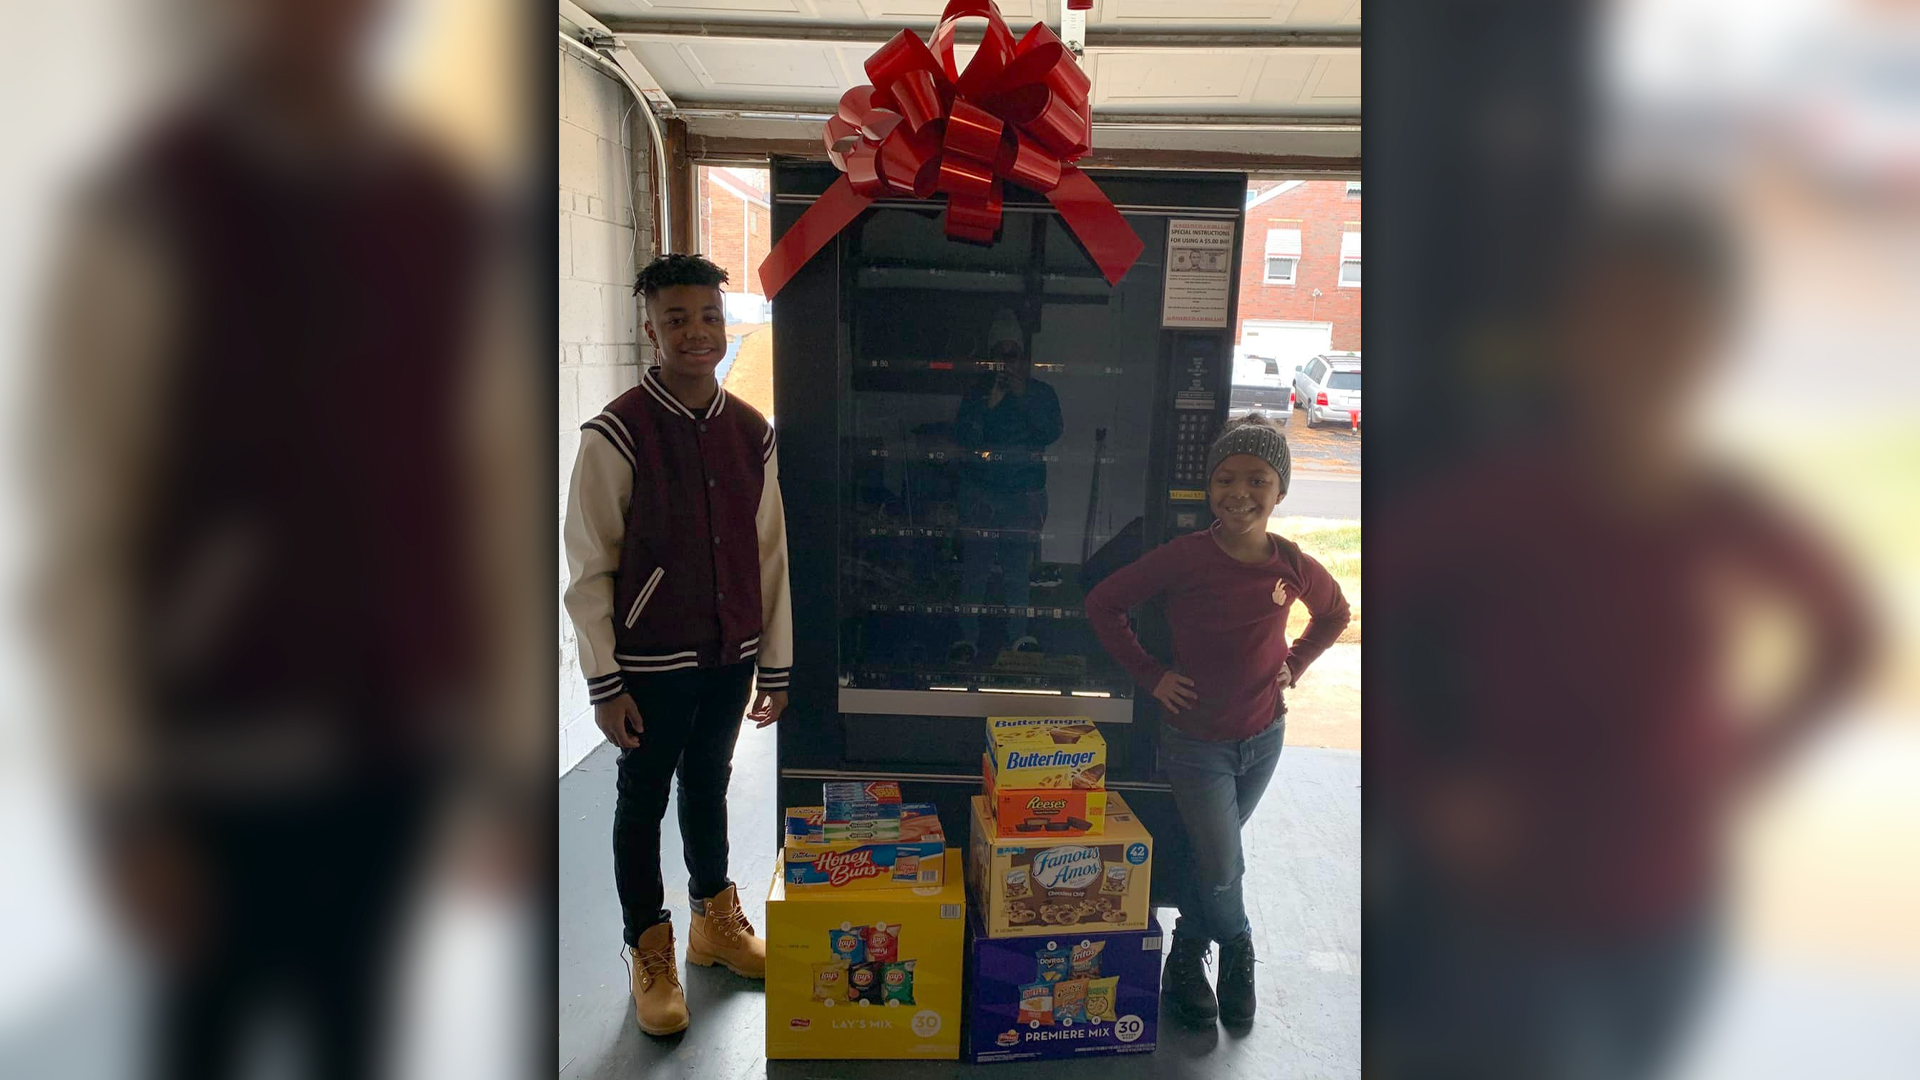 Missouri Mom Gifts Her Kids A Vending Machine In An Effort To Lead Them Down An Entrepreneurial Path